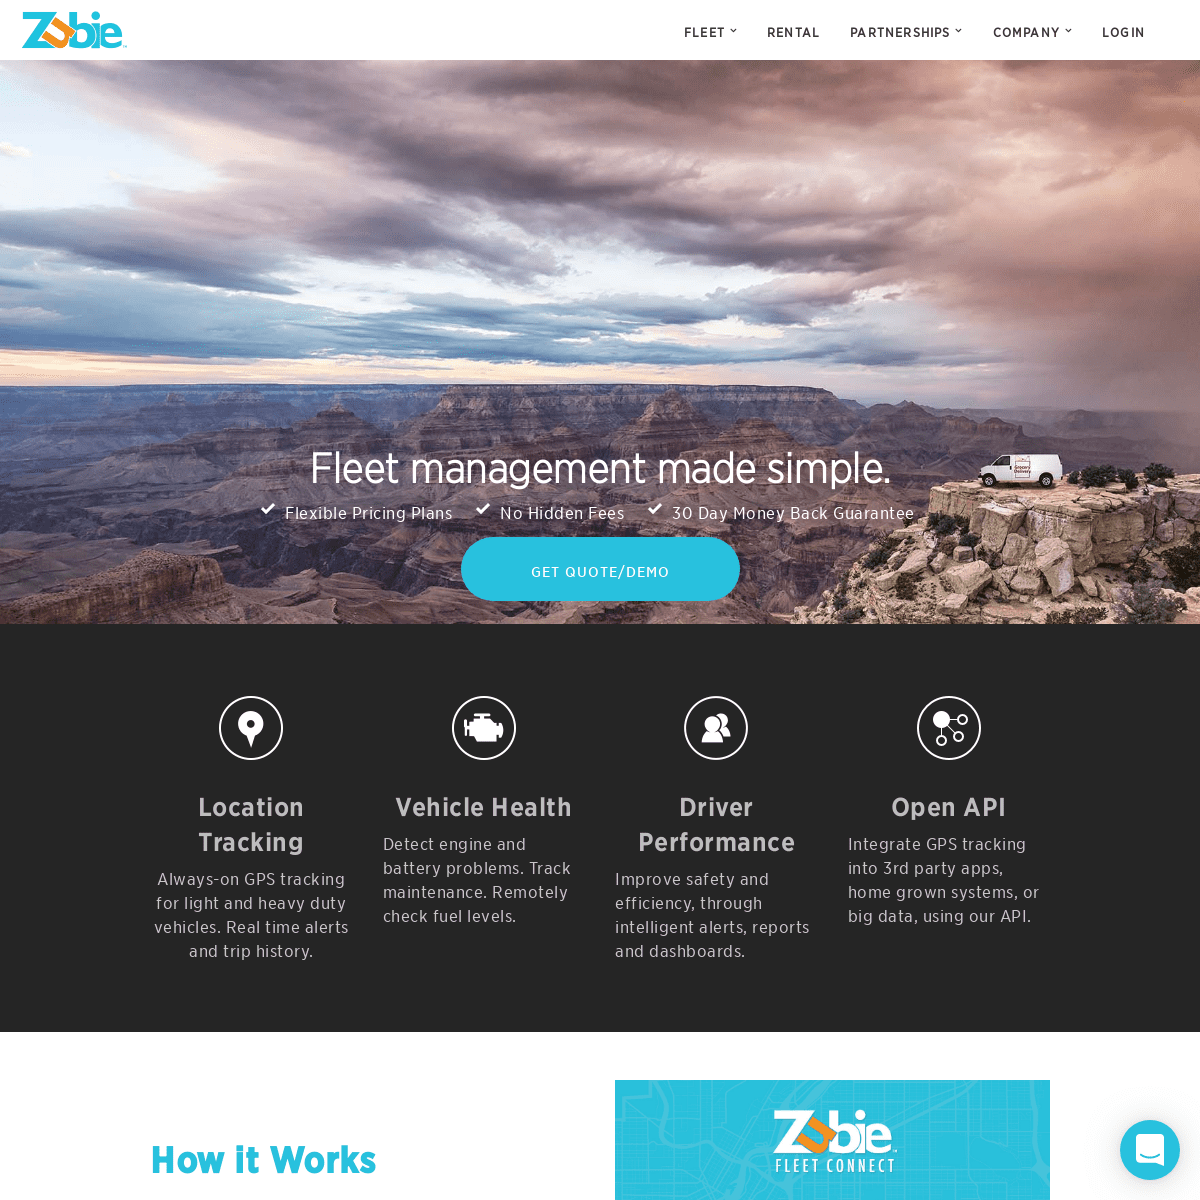 A complete backup of zubie.com